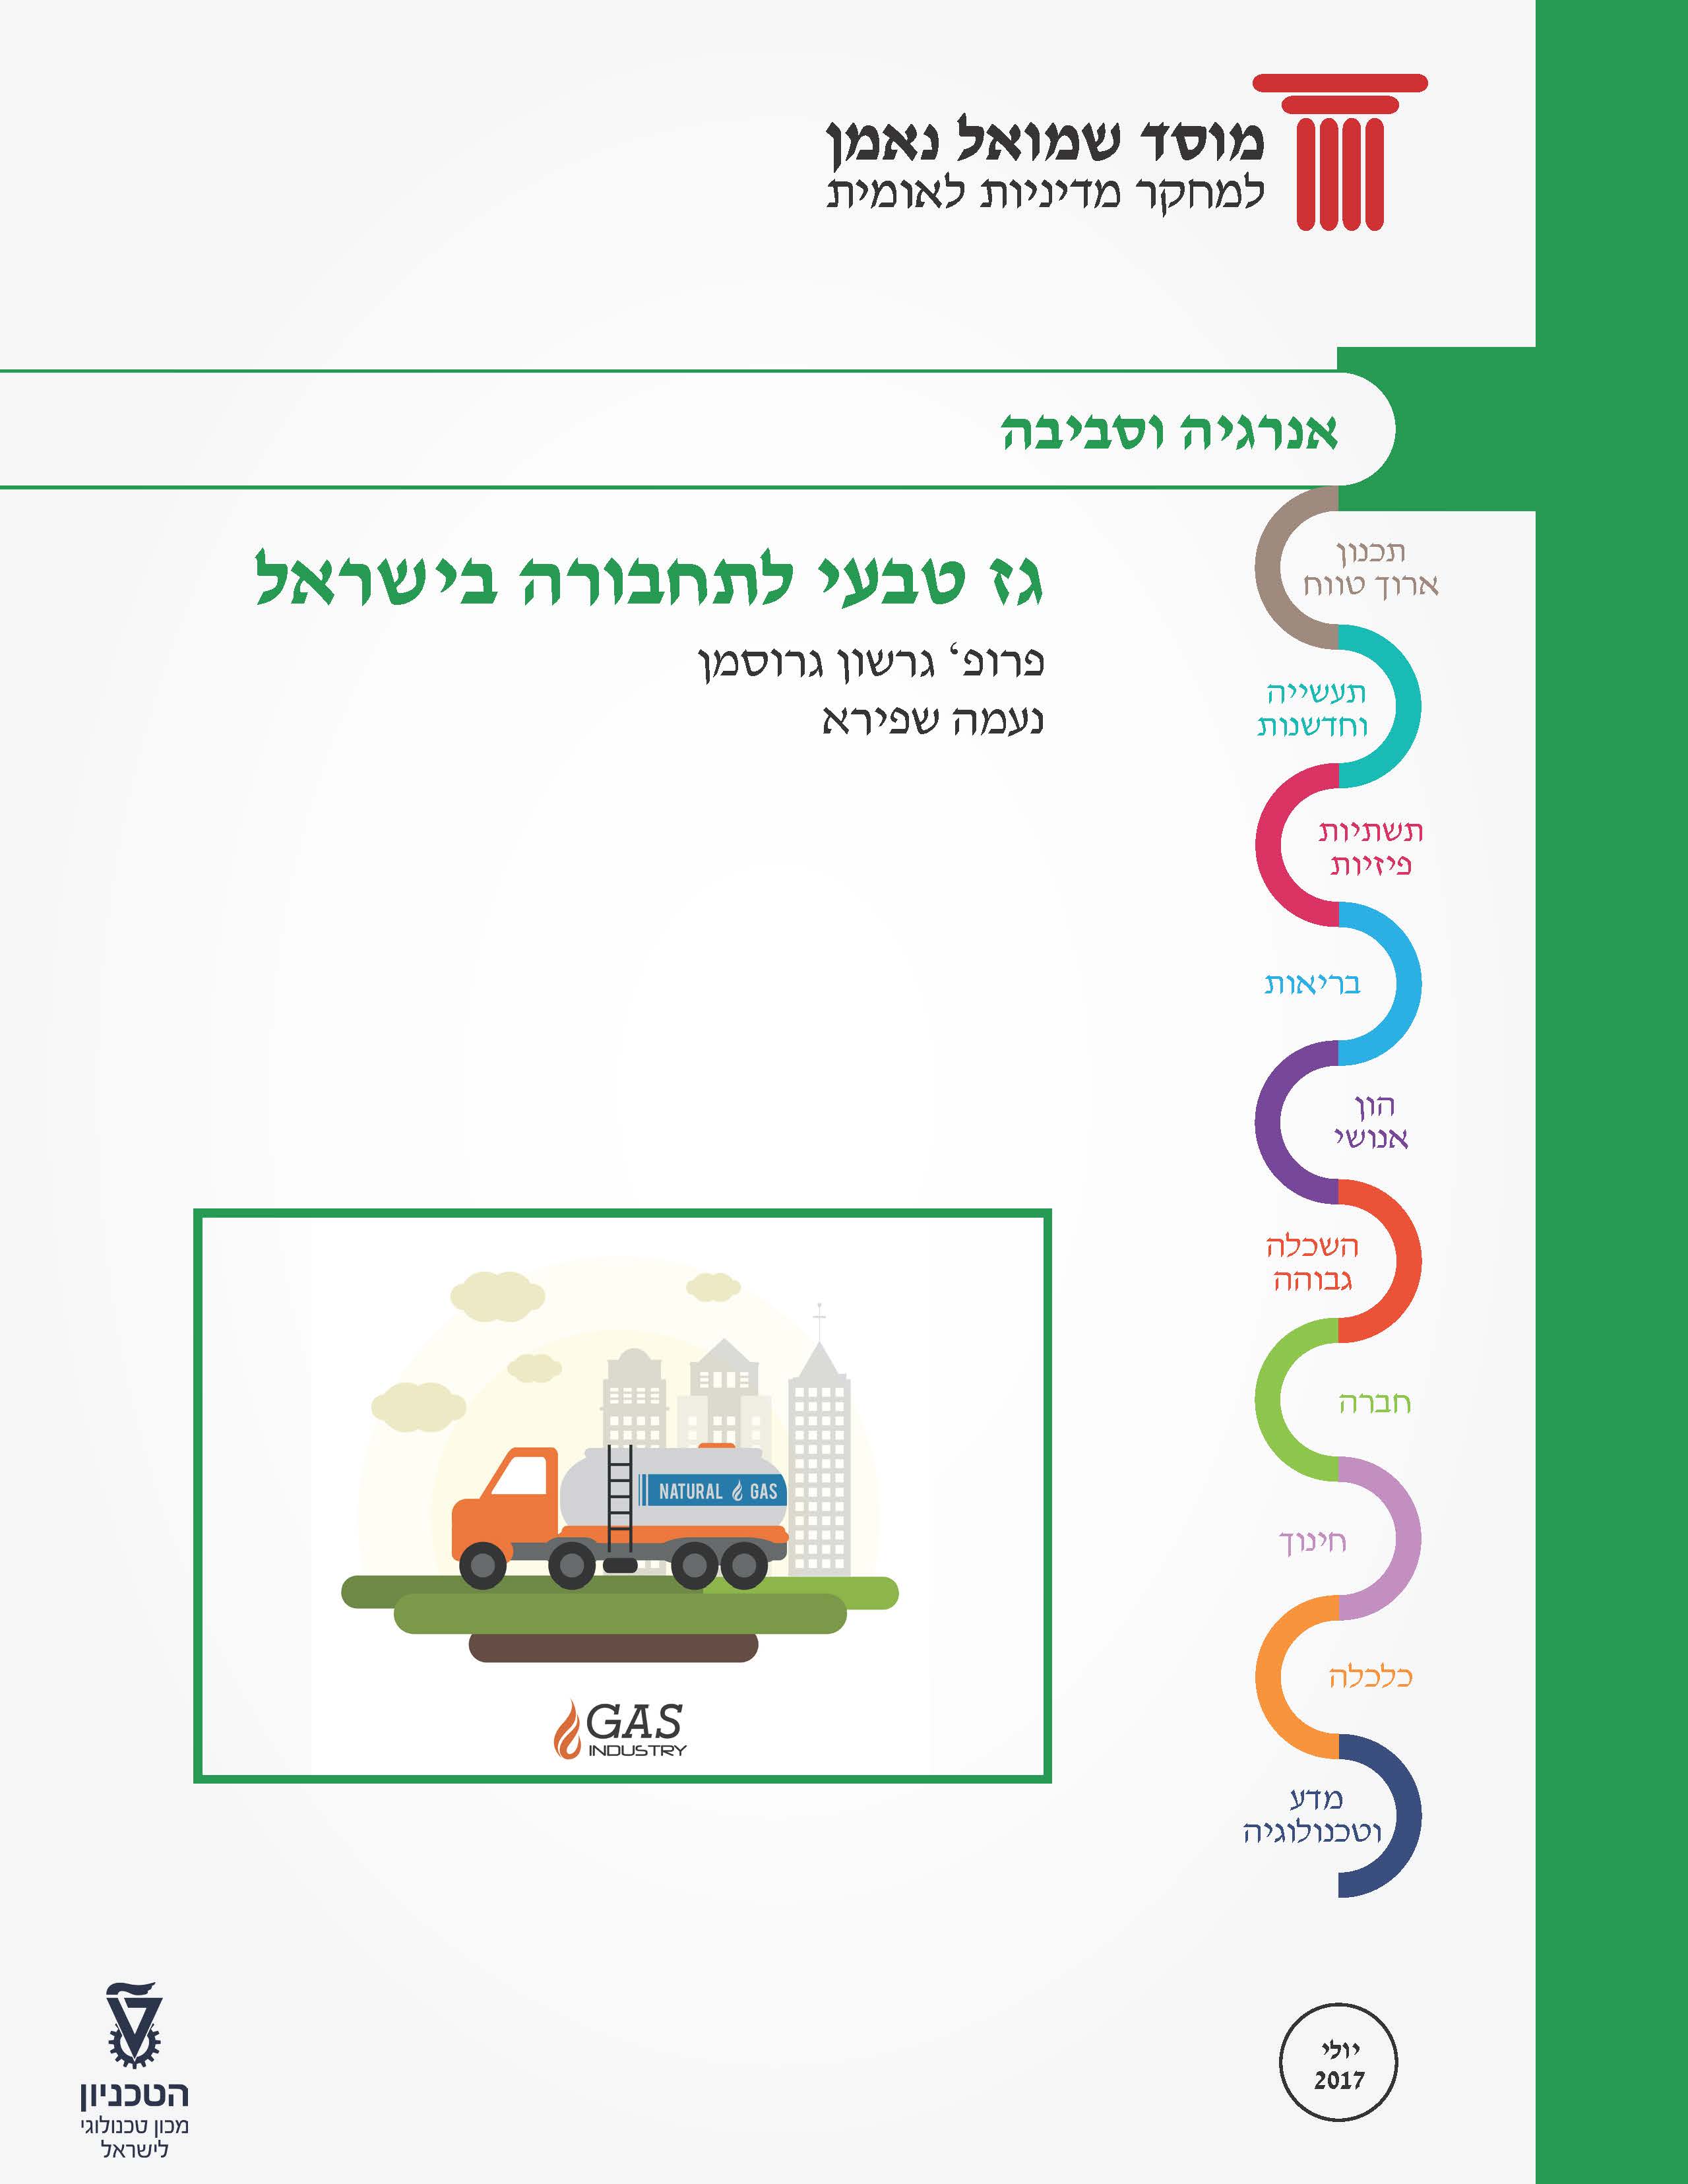 Energy Forum 40: Natural gas for transportation in Israel